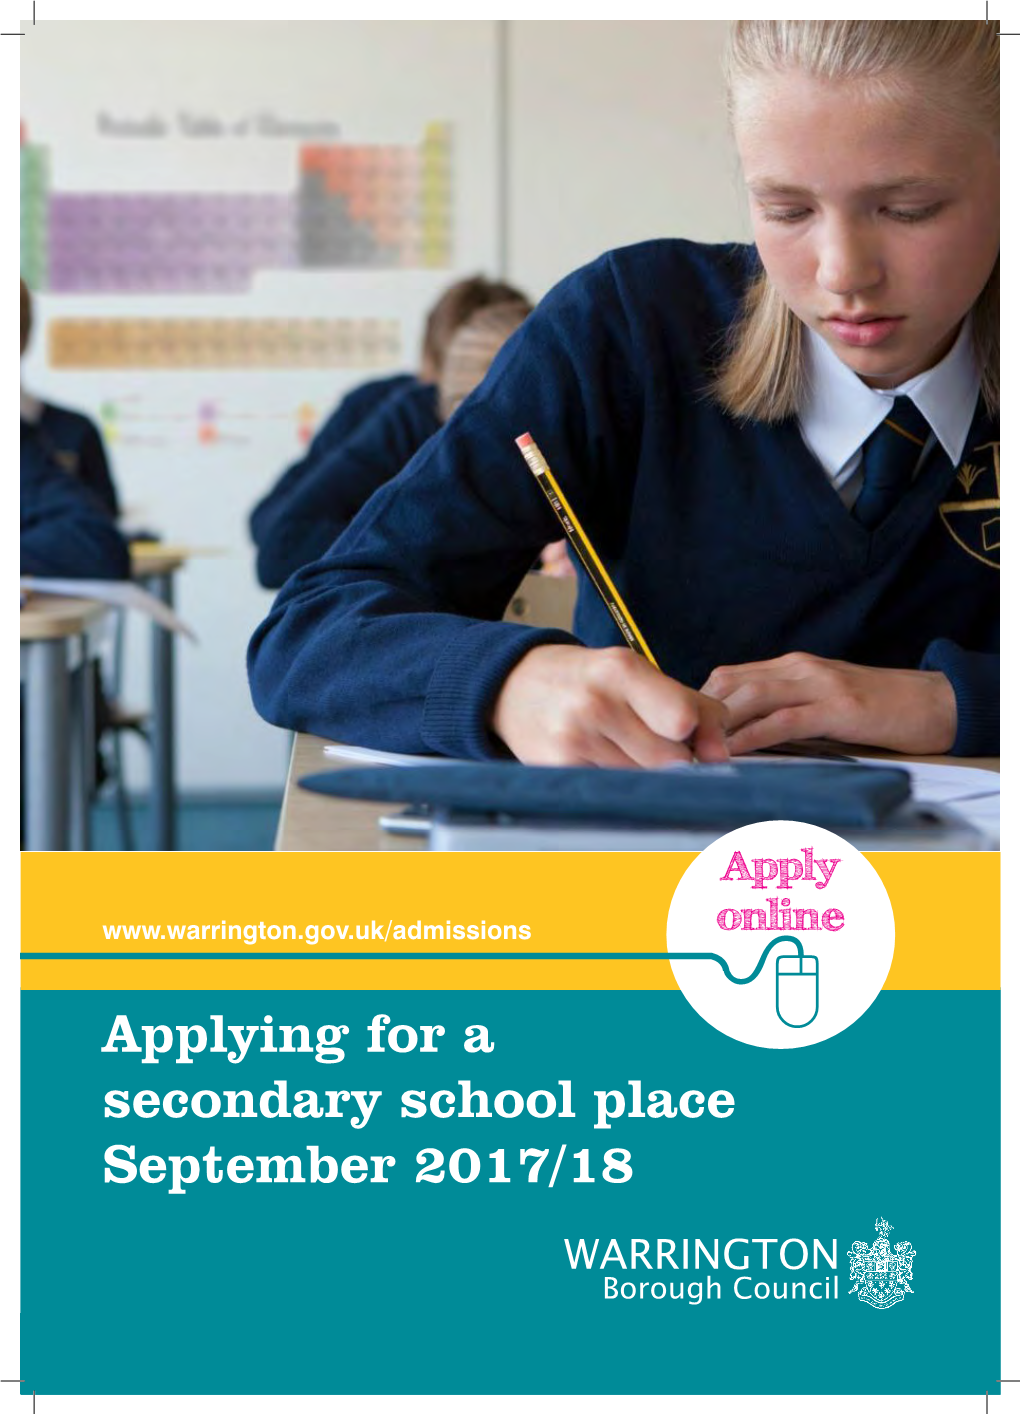 Applying for a Secondary School Place September 2017/18